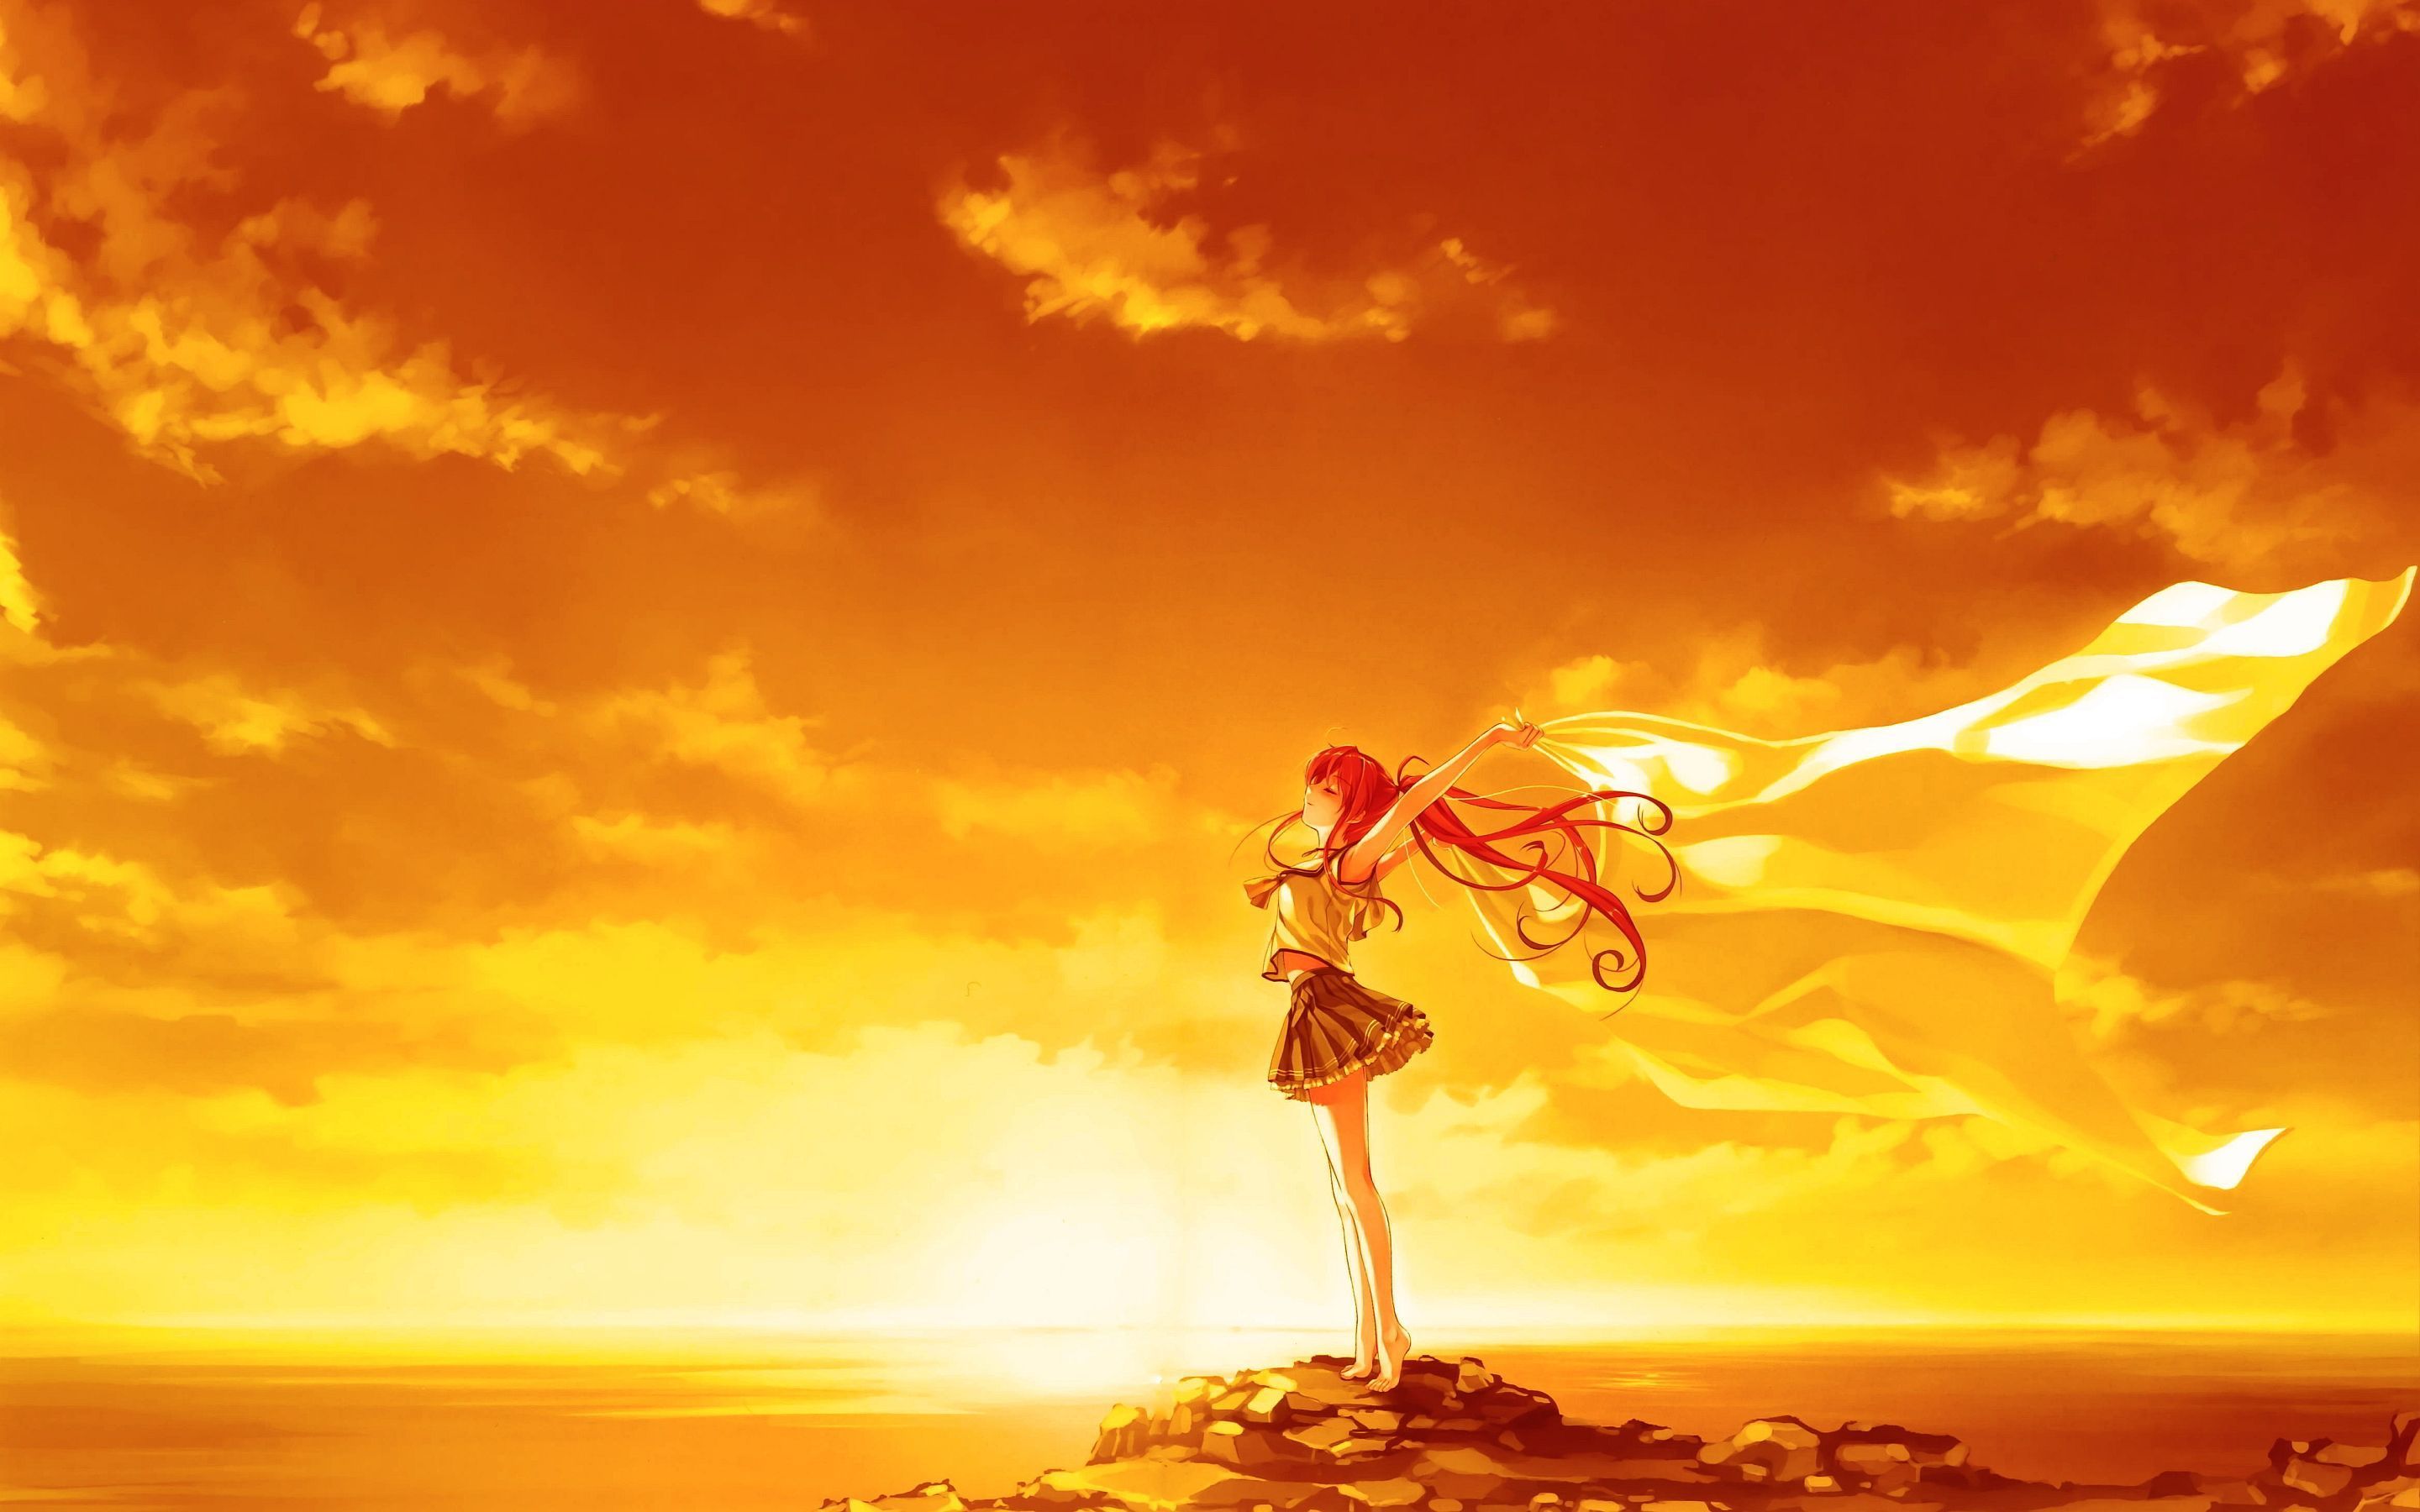 13+ Orange Anime Wallpapers for iPhone and Android by William Russell